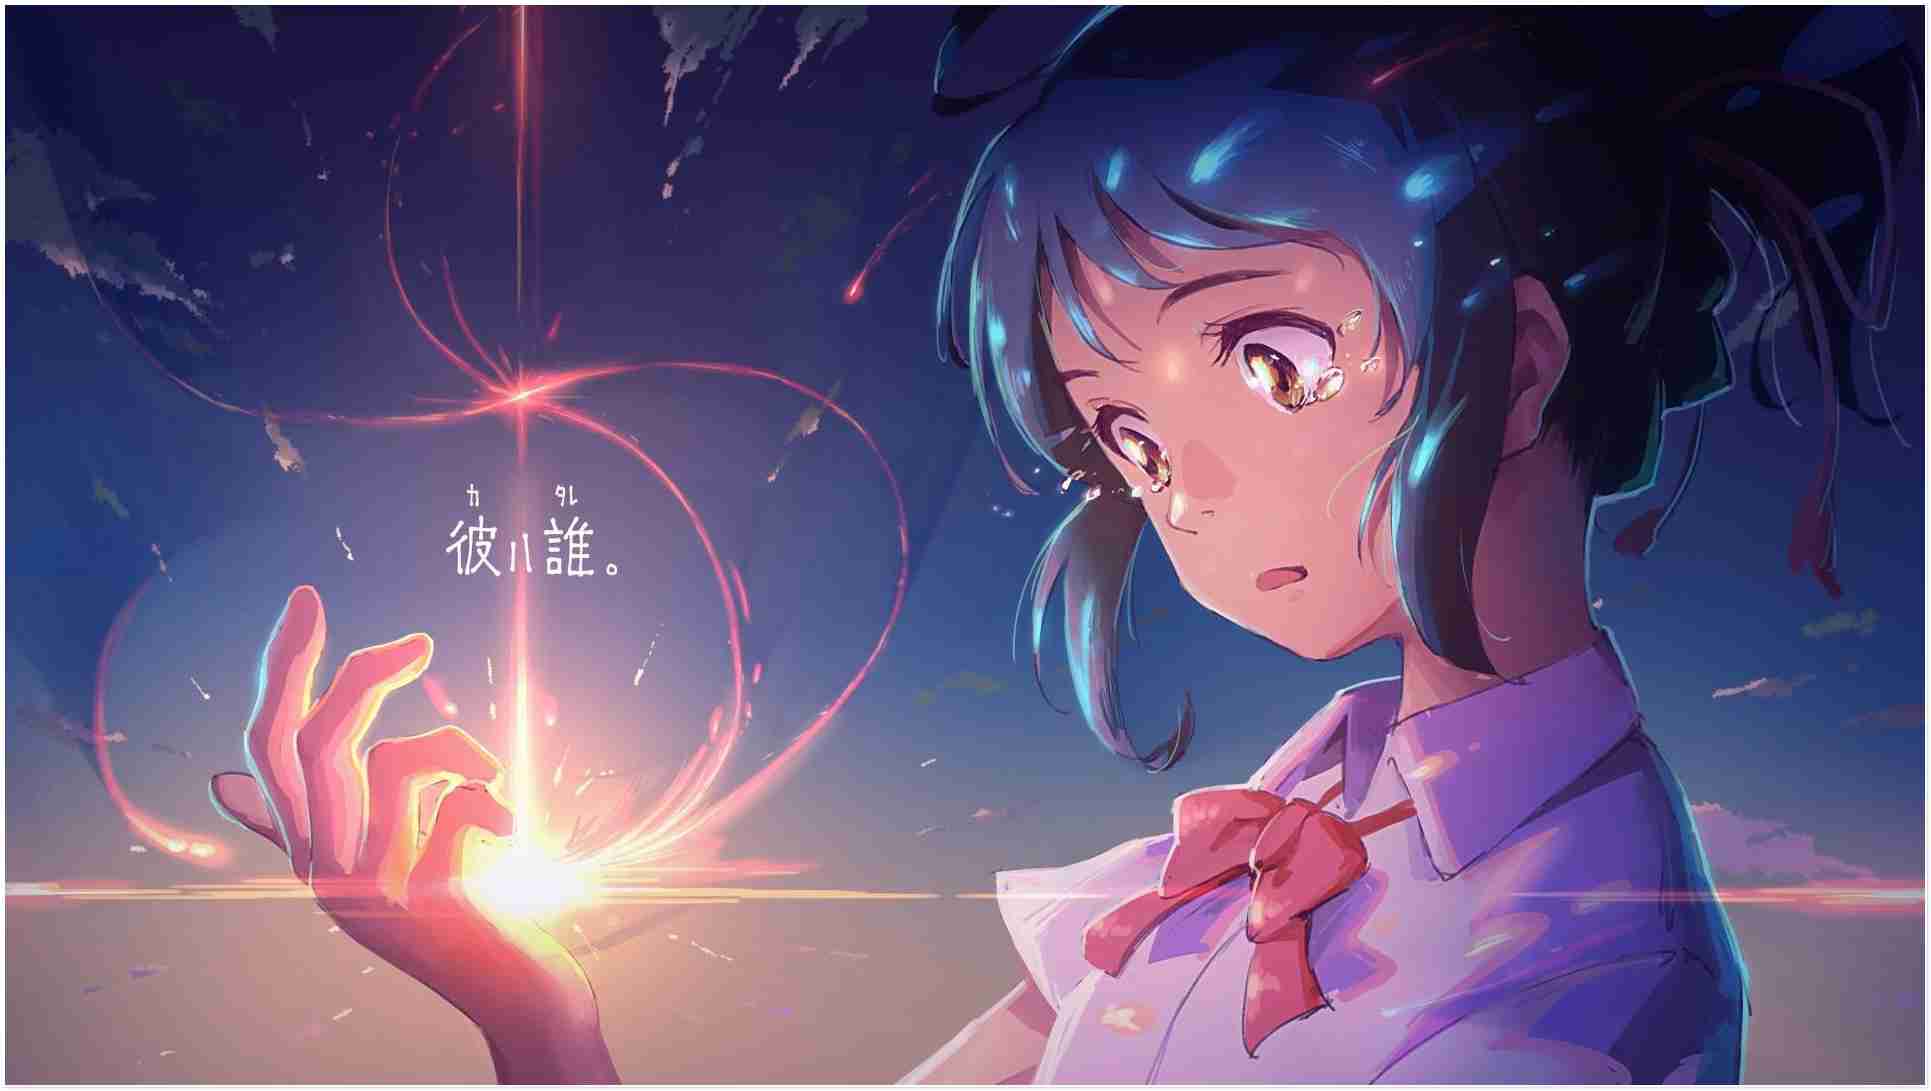 Awesome Free 17 your name wallpaper latest Update Wallpaper Wise